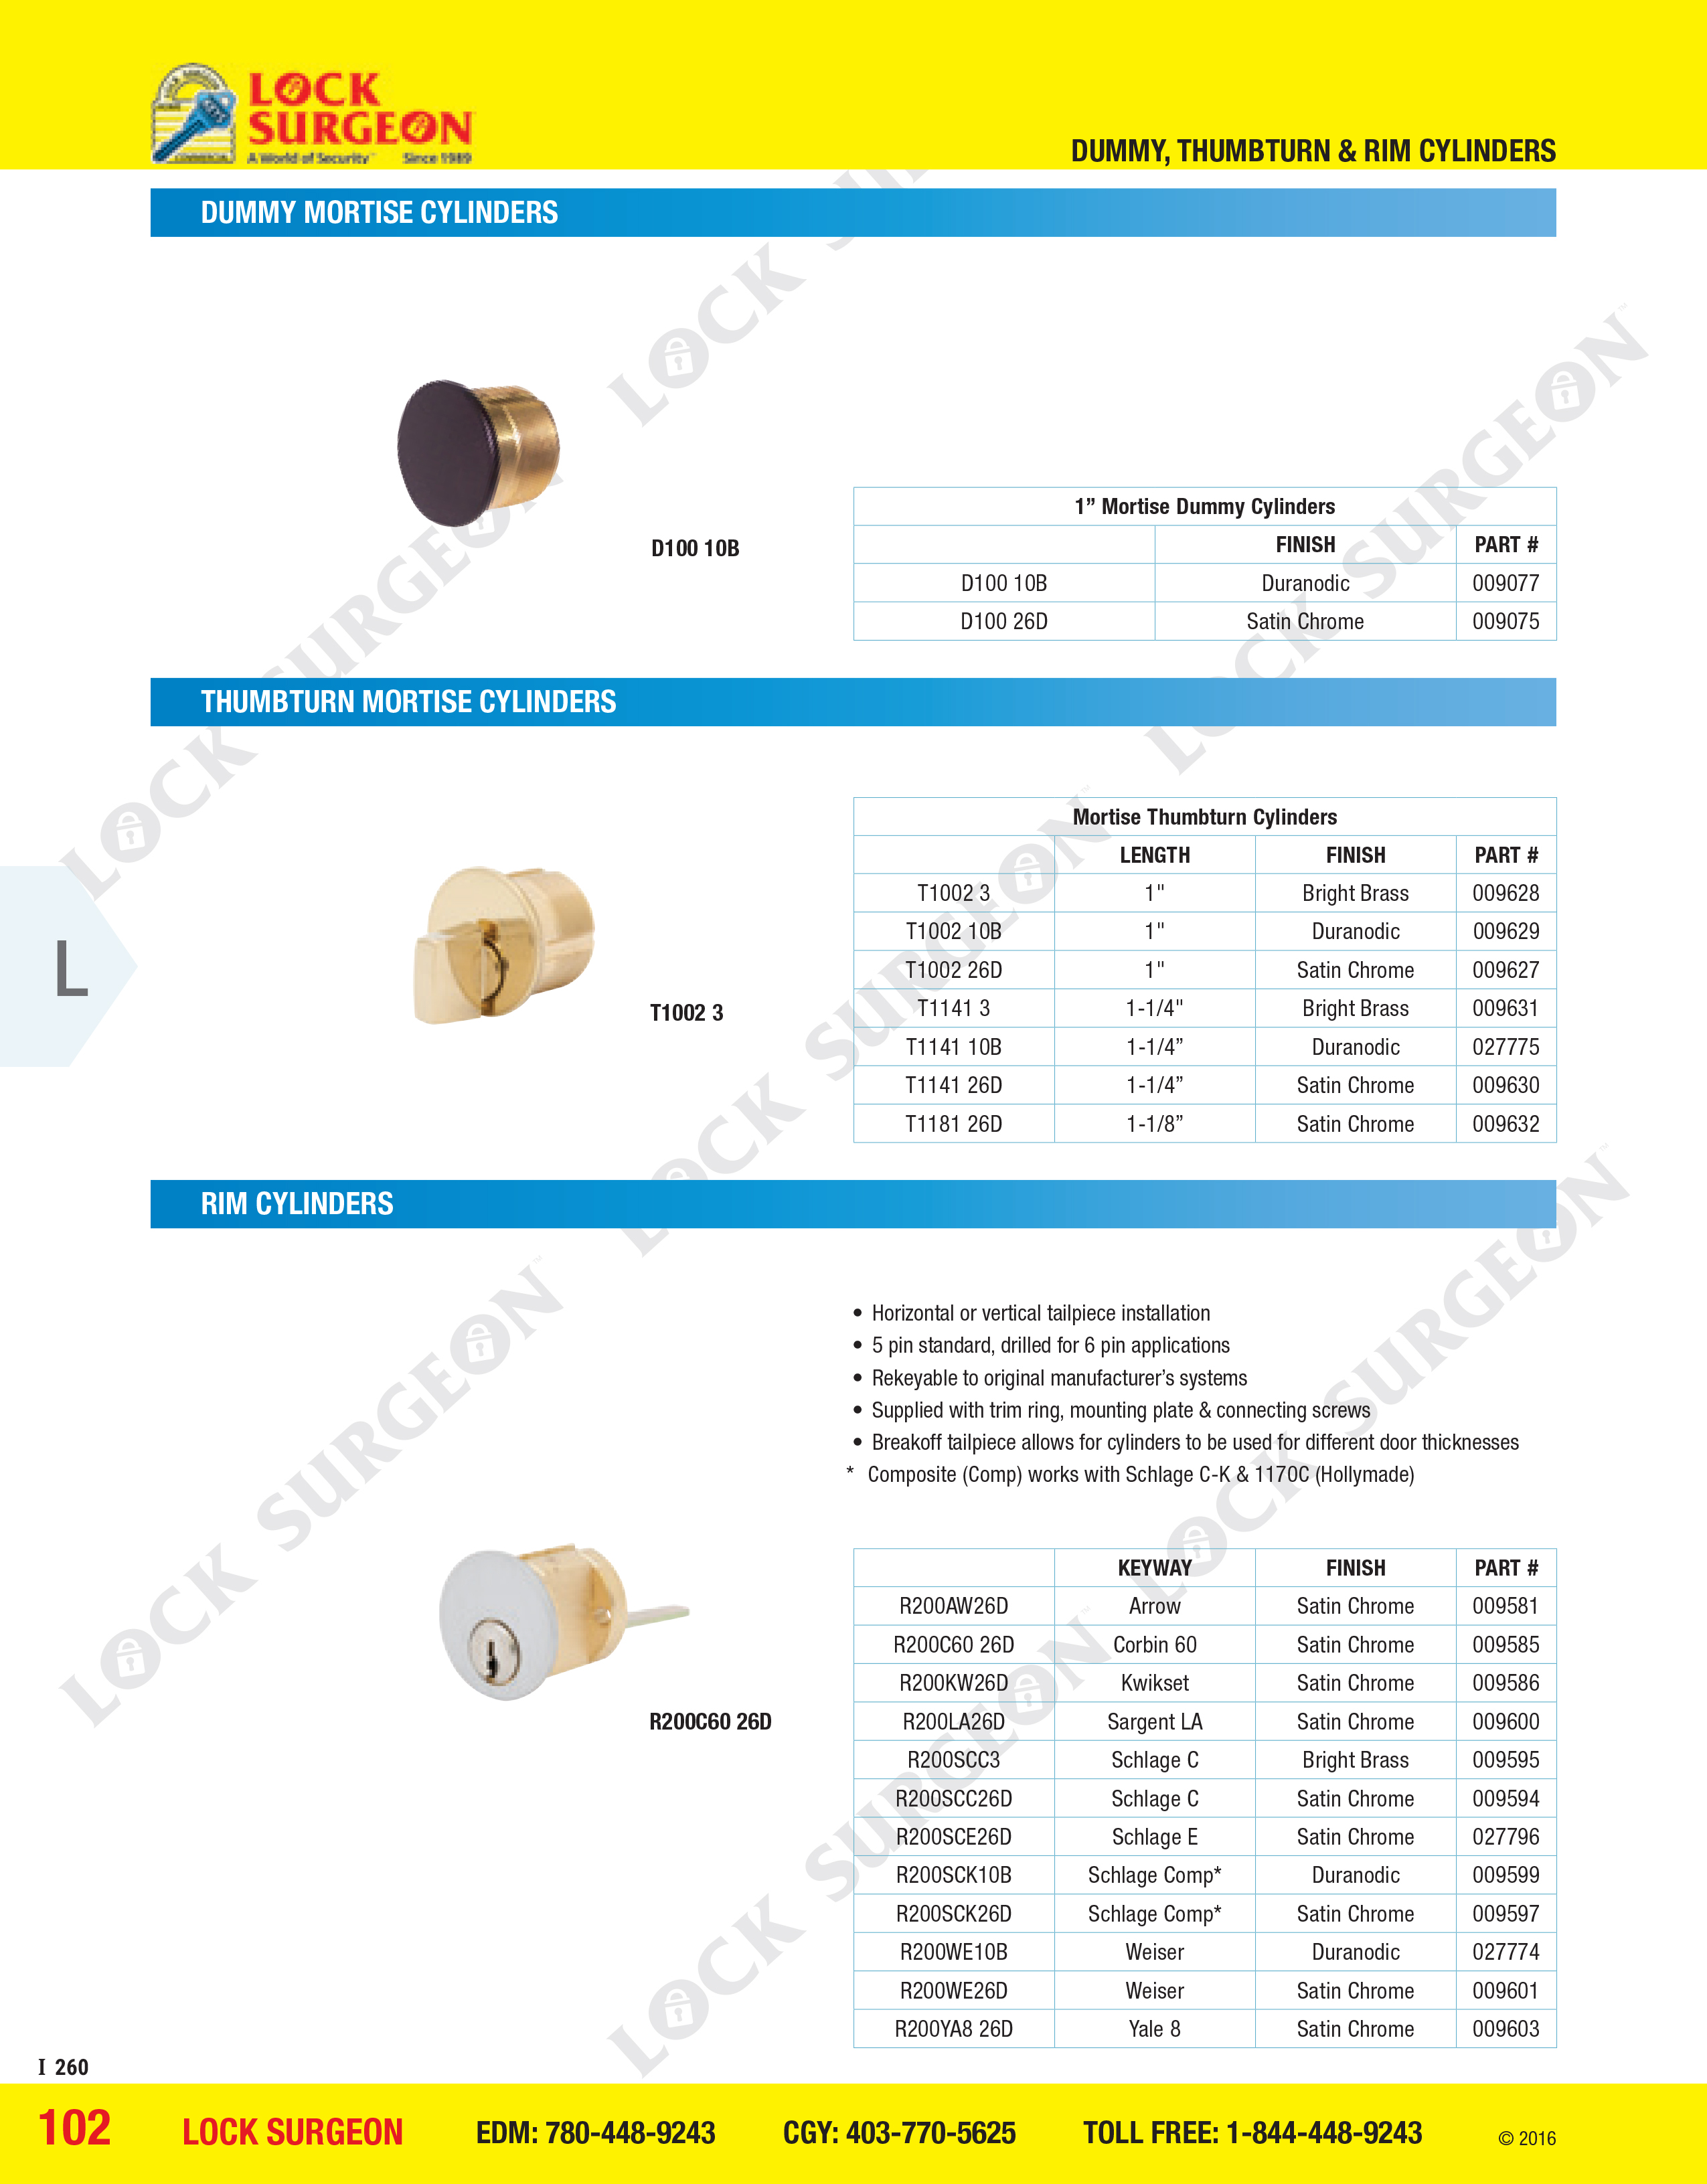 Dummy mortise cyliders, thumbturn mortise cylinders, rim cylinders.